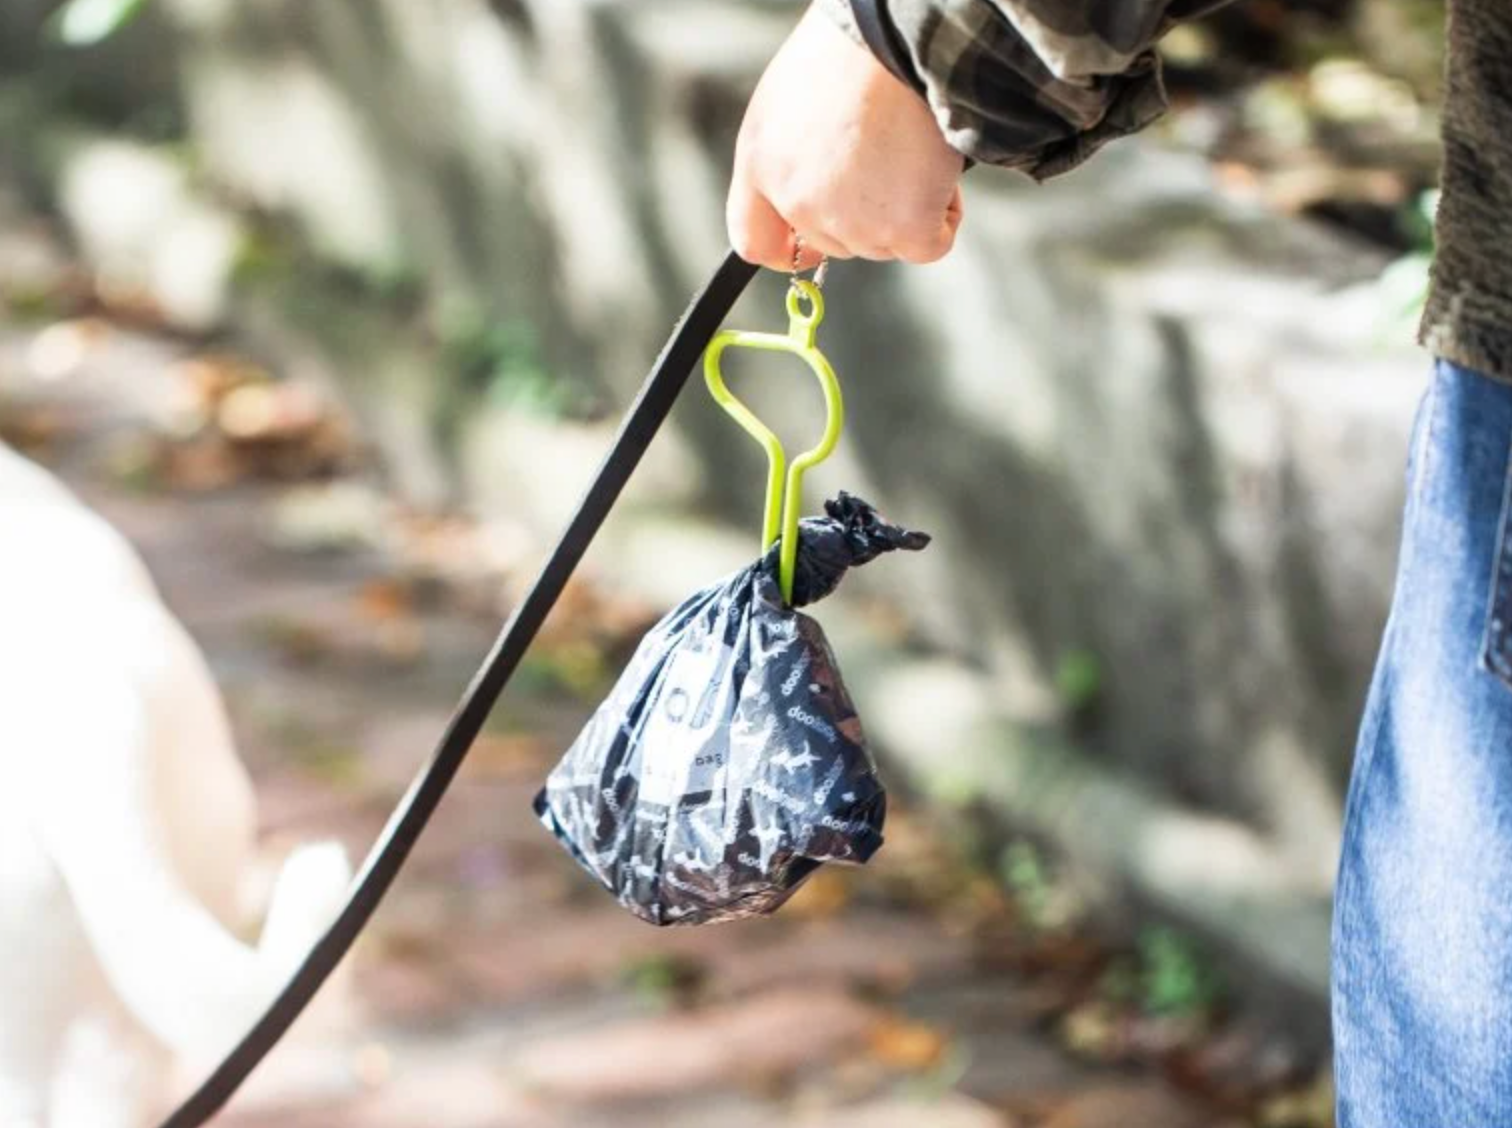 Model holding leash with waste bag carrying attached